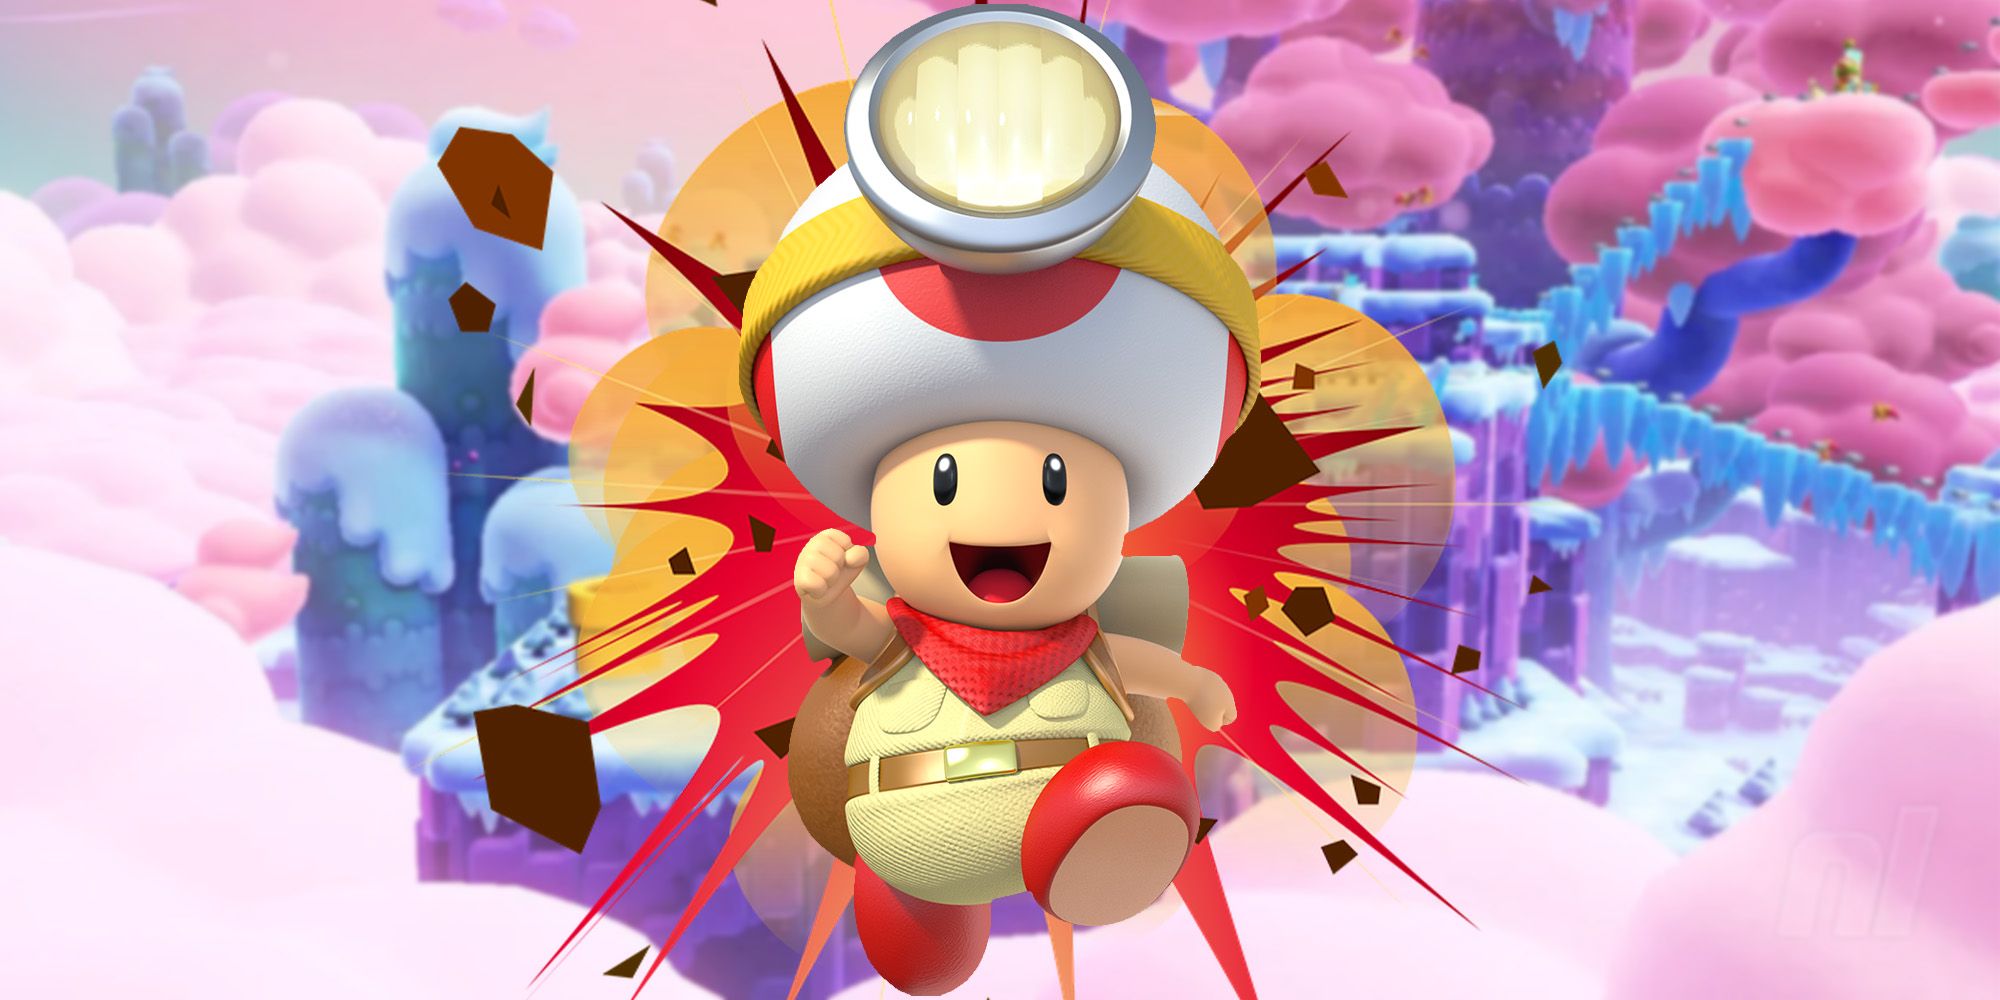 Super Mario Bros. Wonder Captain Toad Found in Five Different Locations Across Multiple Worlds